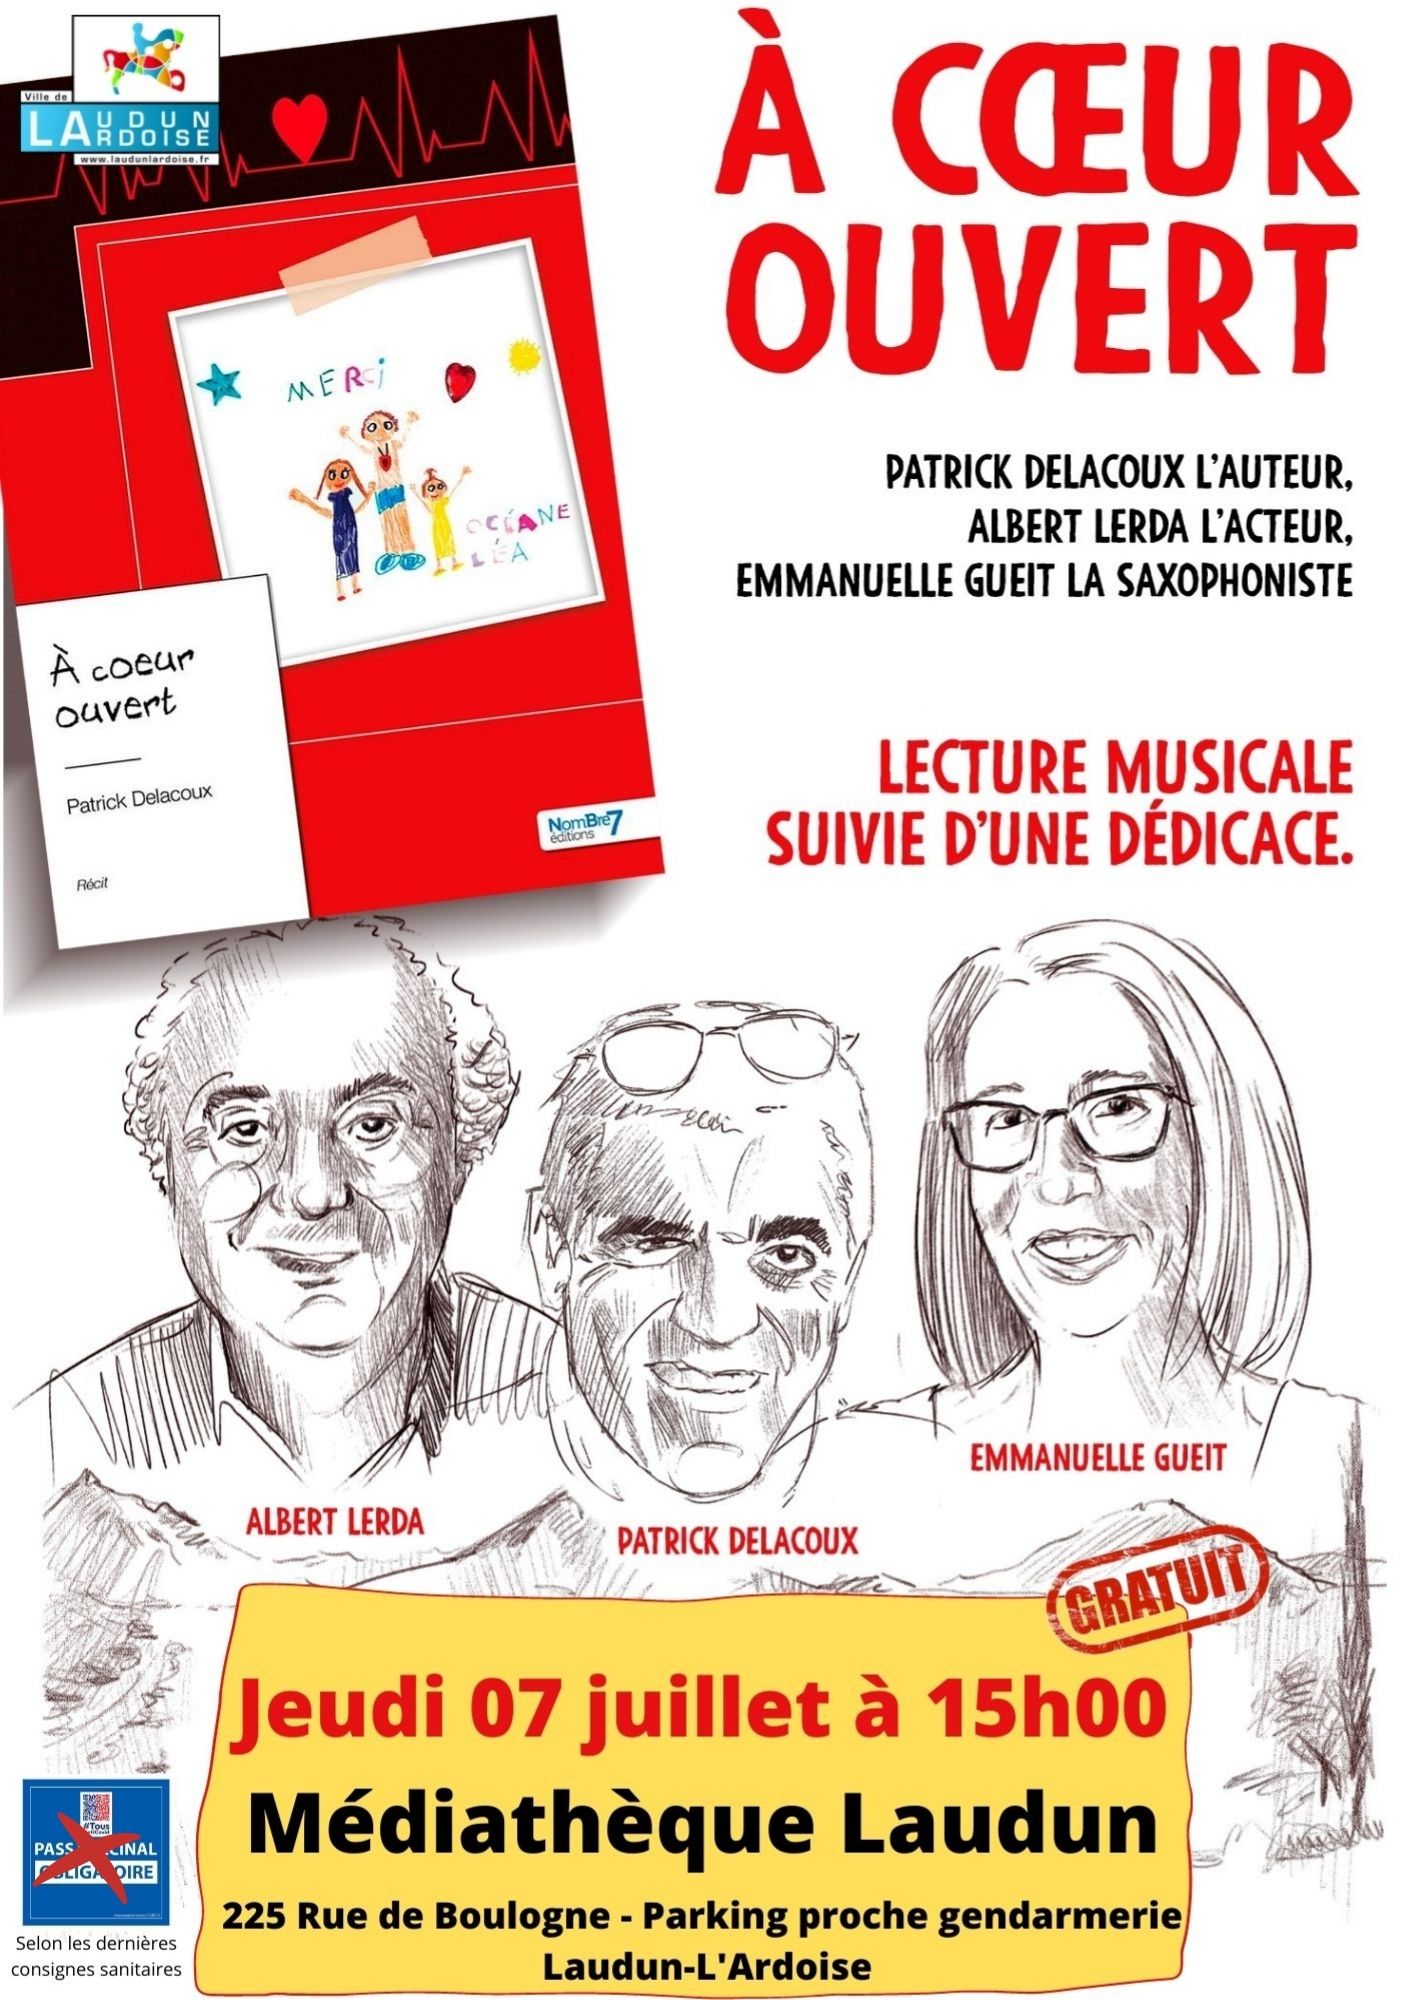 lecture Musicale 07 07 2022